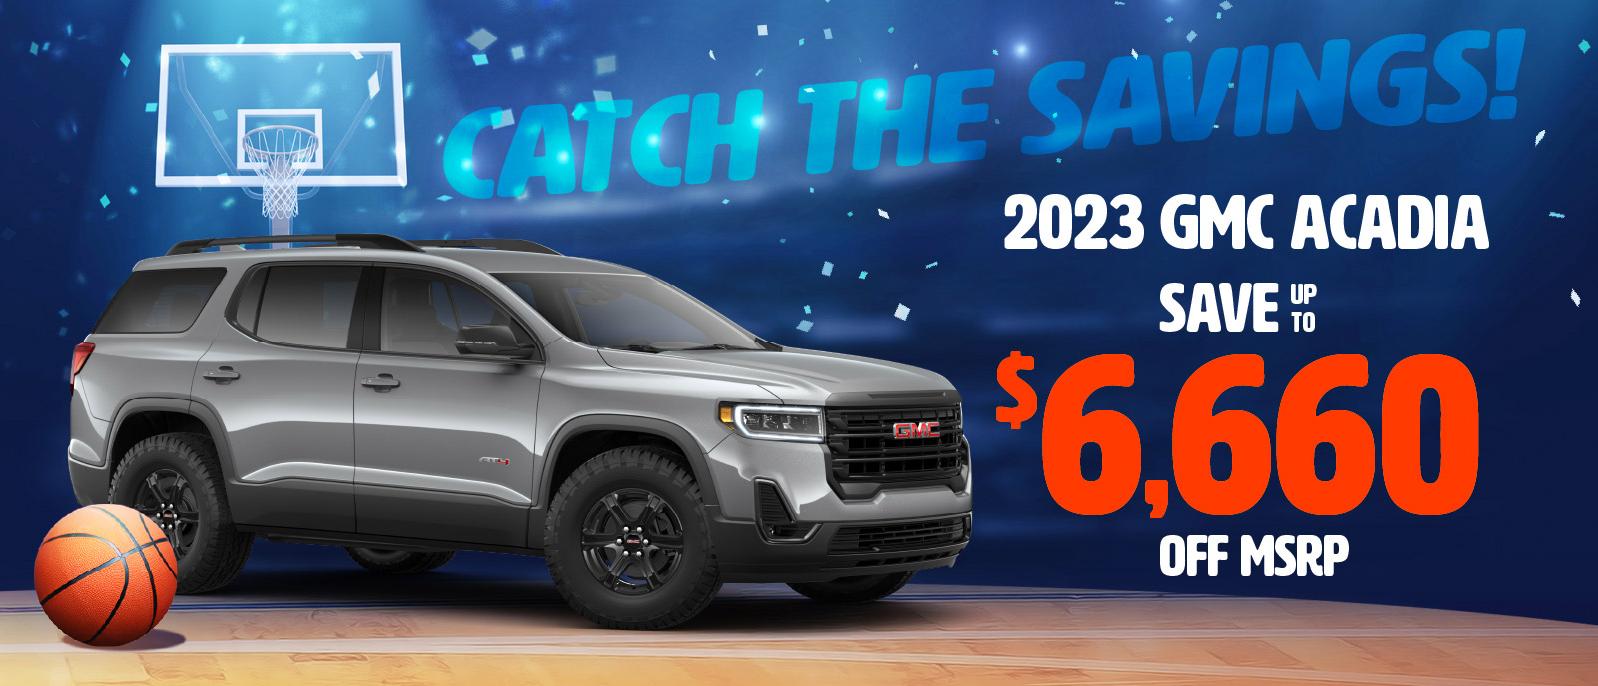 2023 GMC Acadia - SAVE up to $6660 off MSRP 